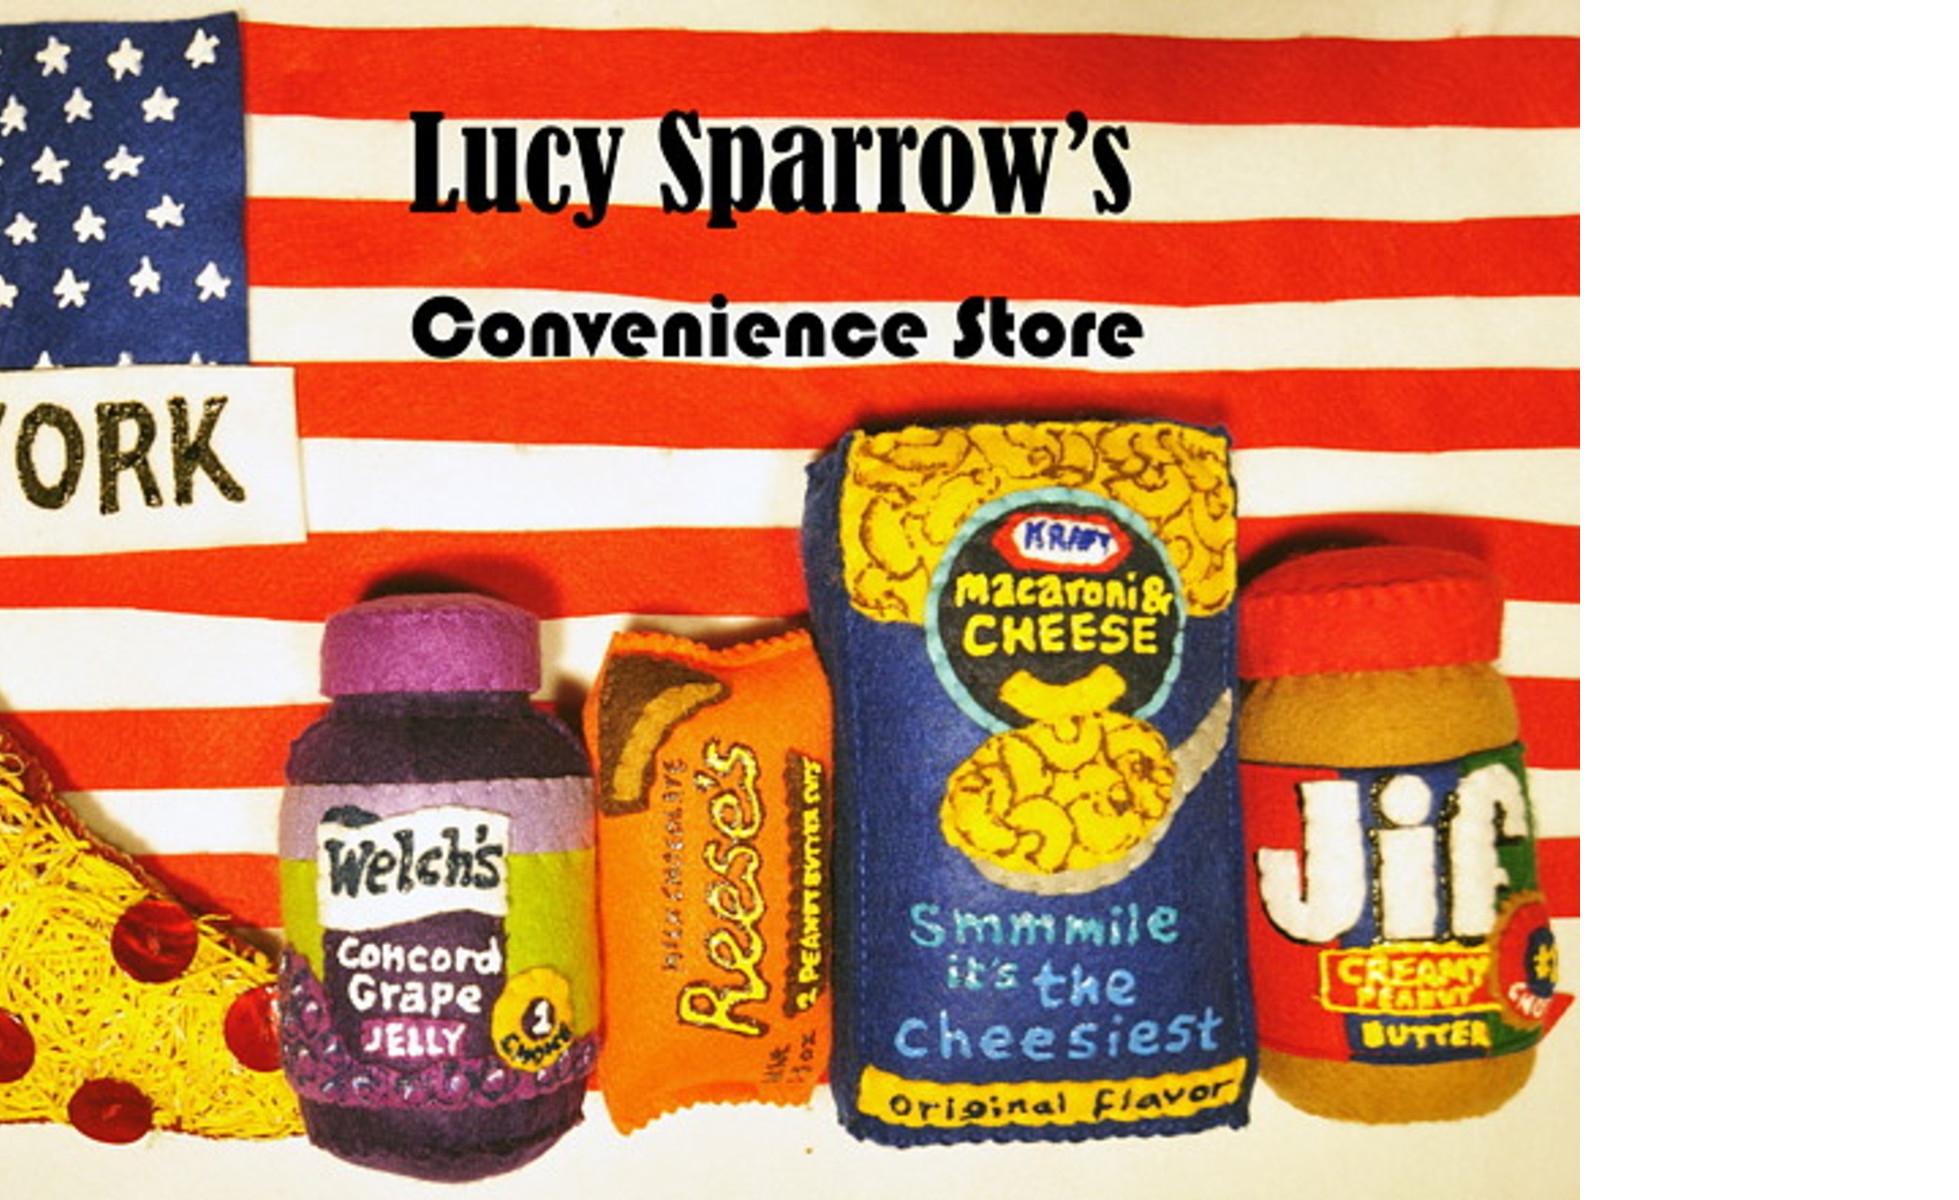 The New York Convenience Store Lucy Sparrow